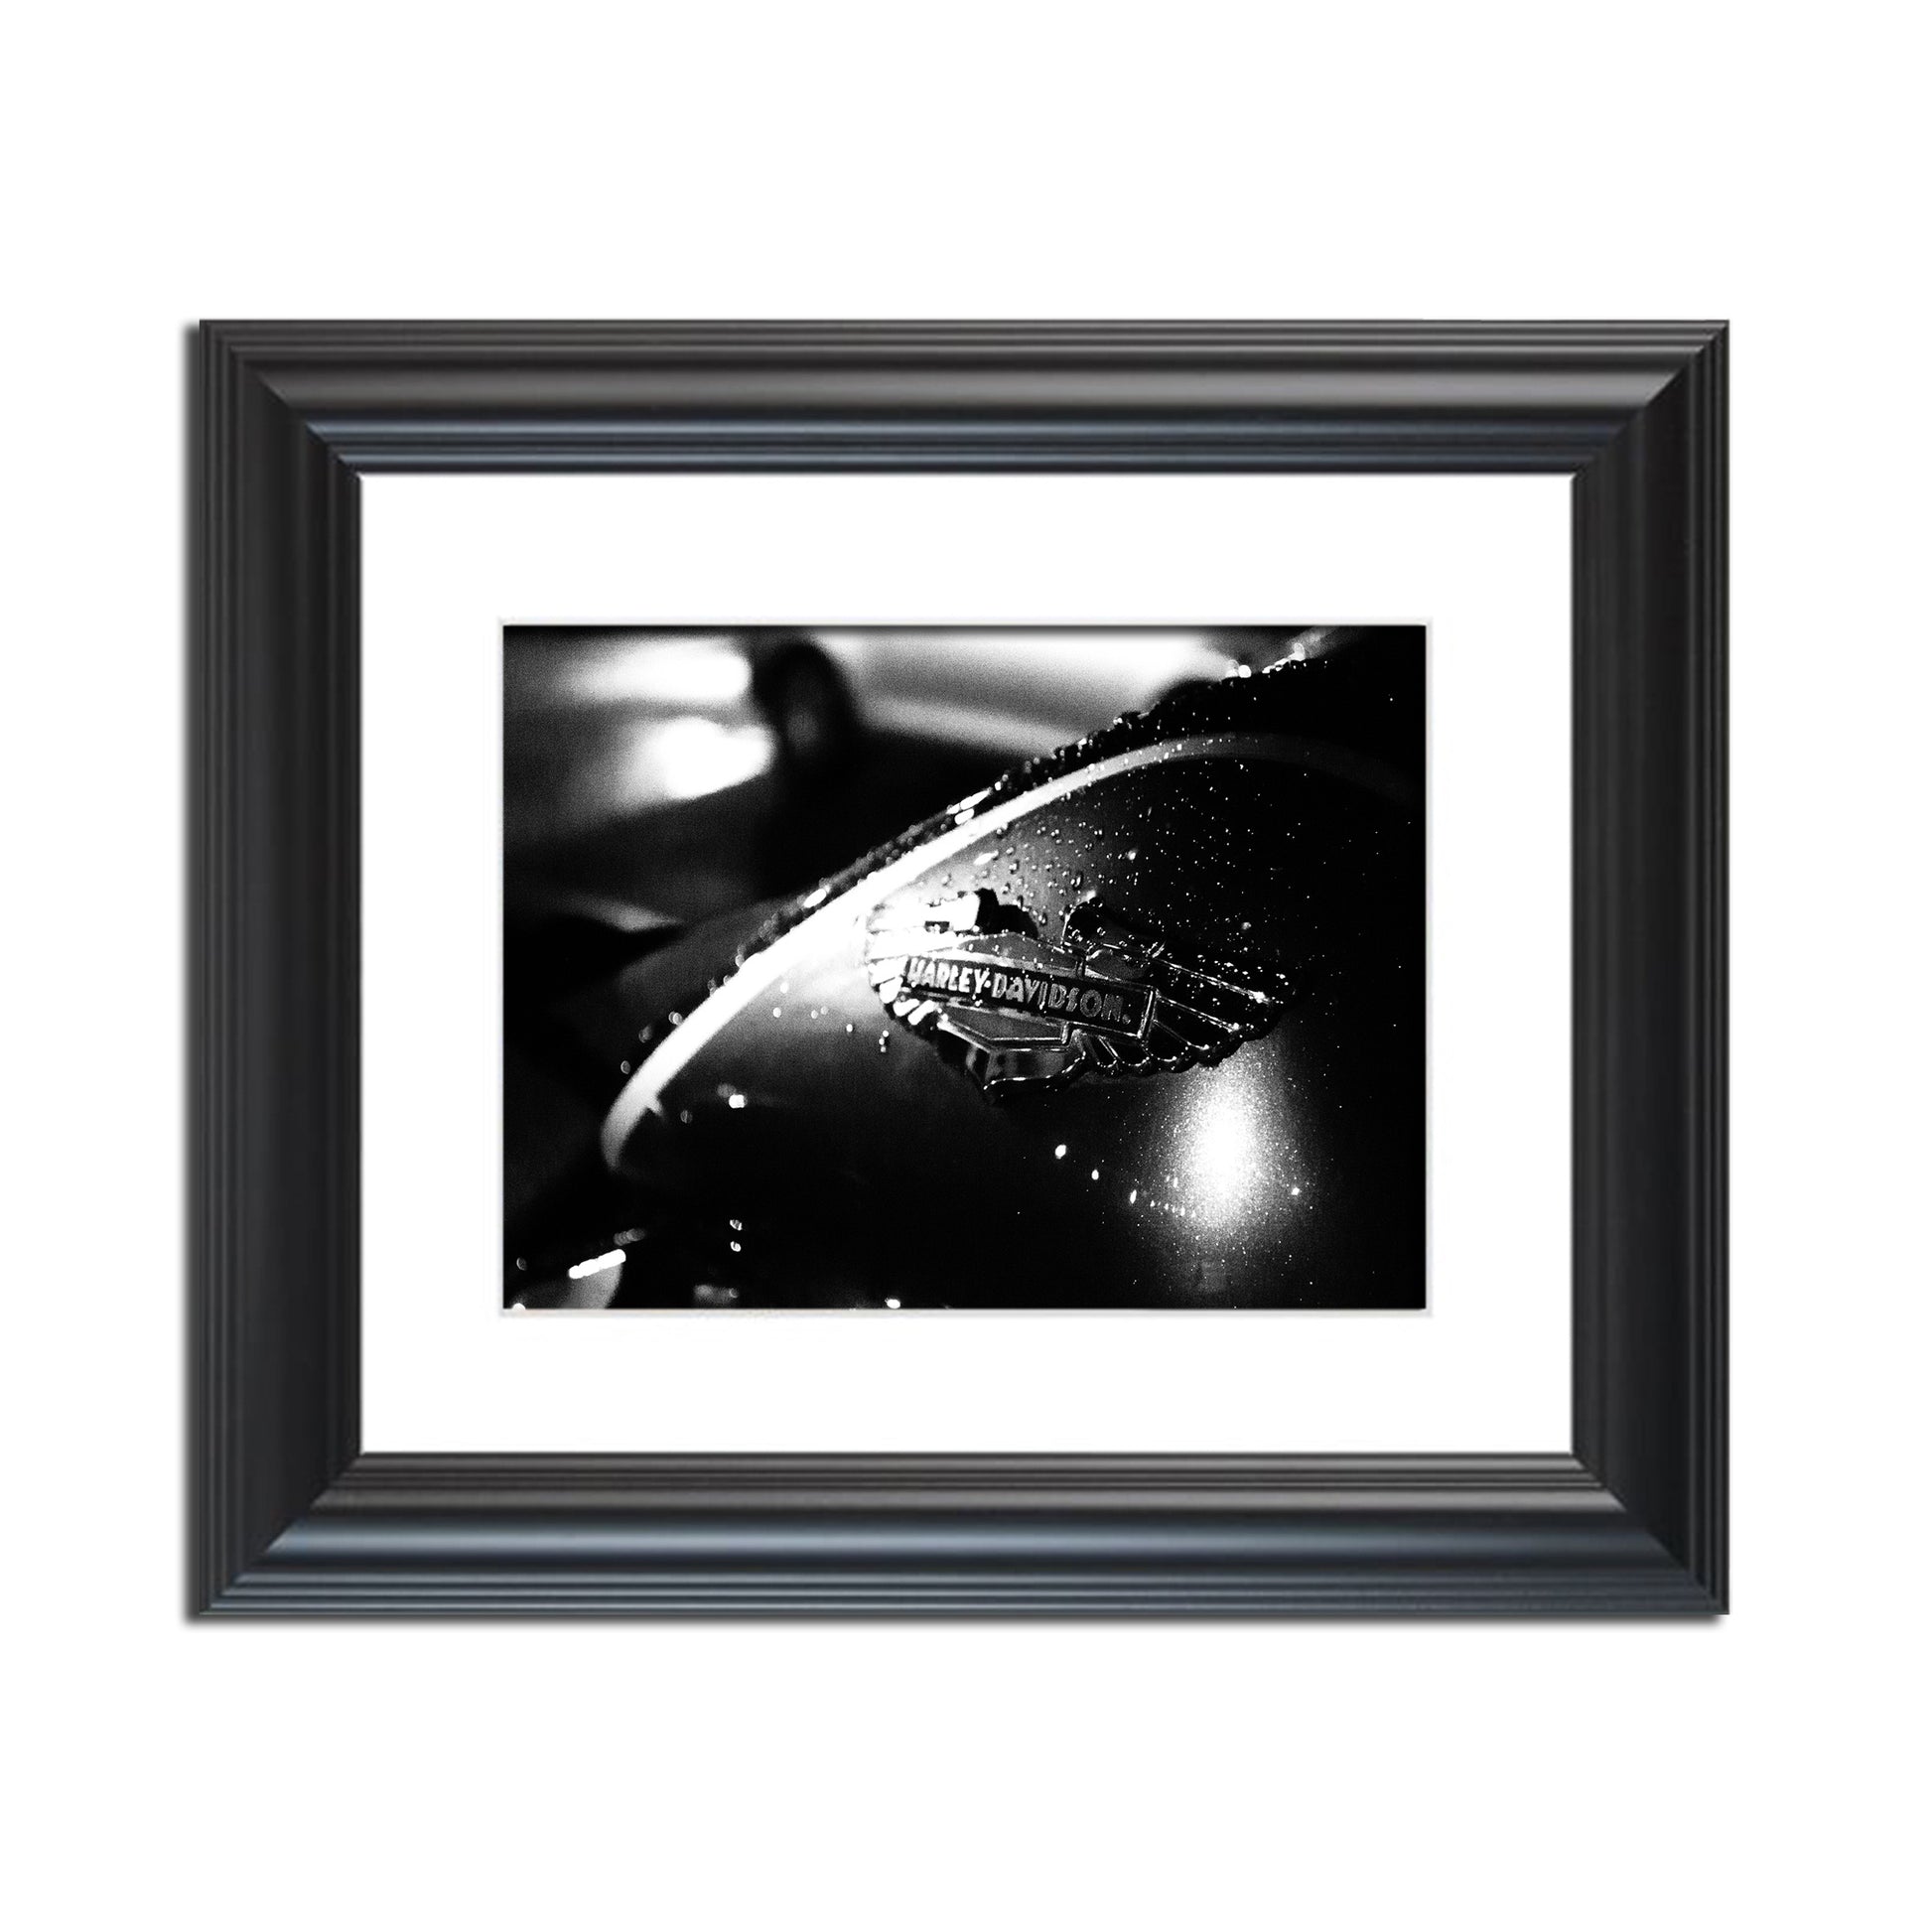 Harley in the Rain Abstract Photo Fine Art Canvas & Unframed Wall Art Prints  - PIPAFINEART